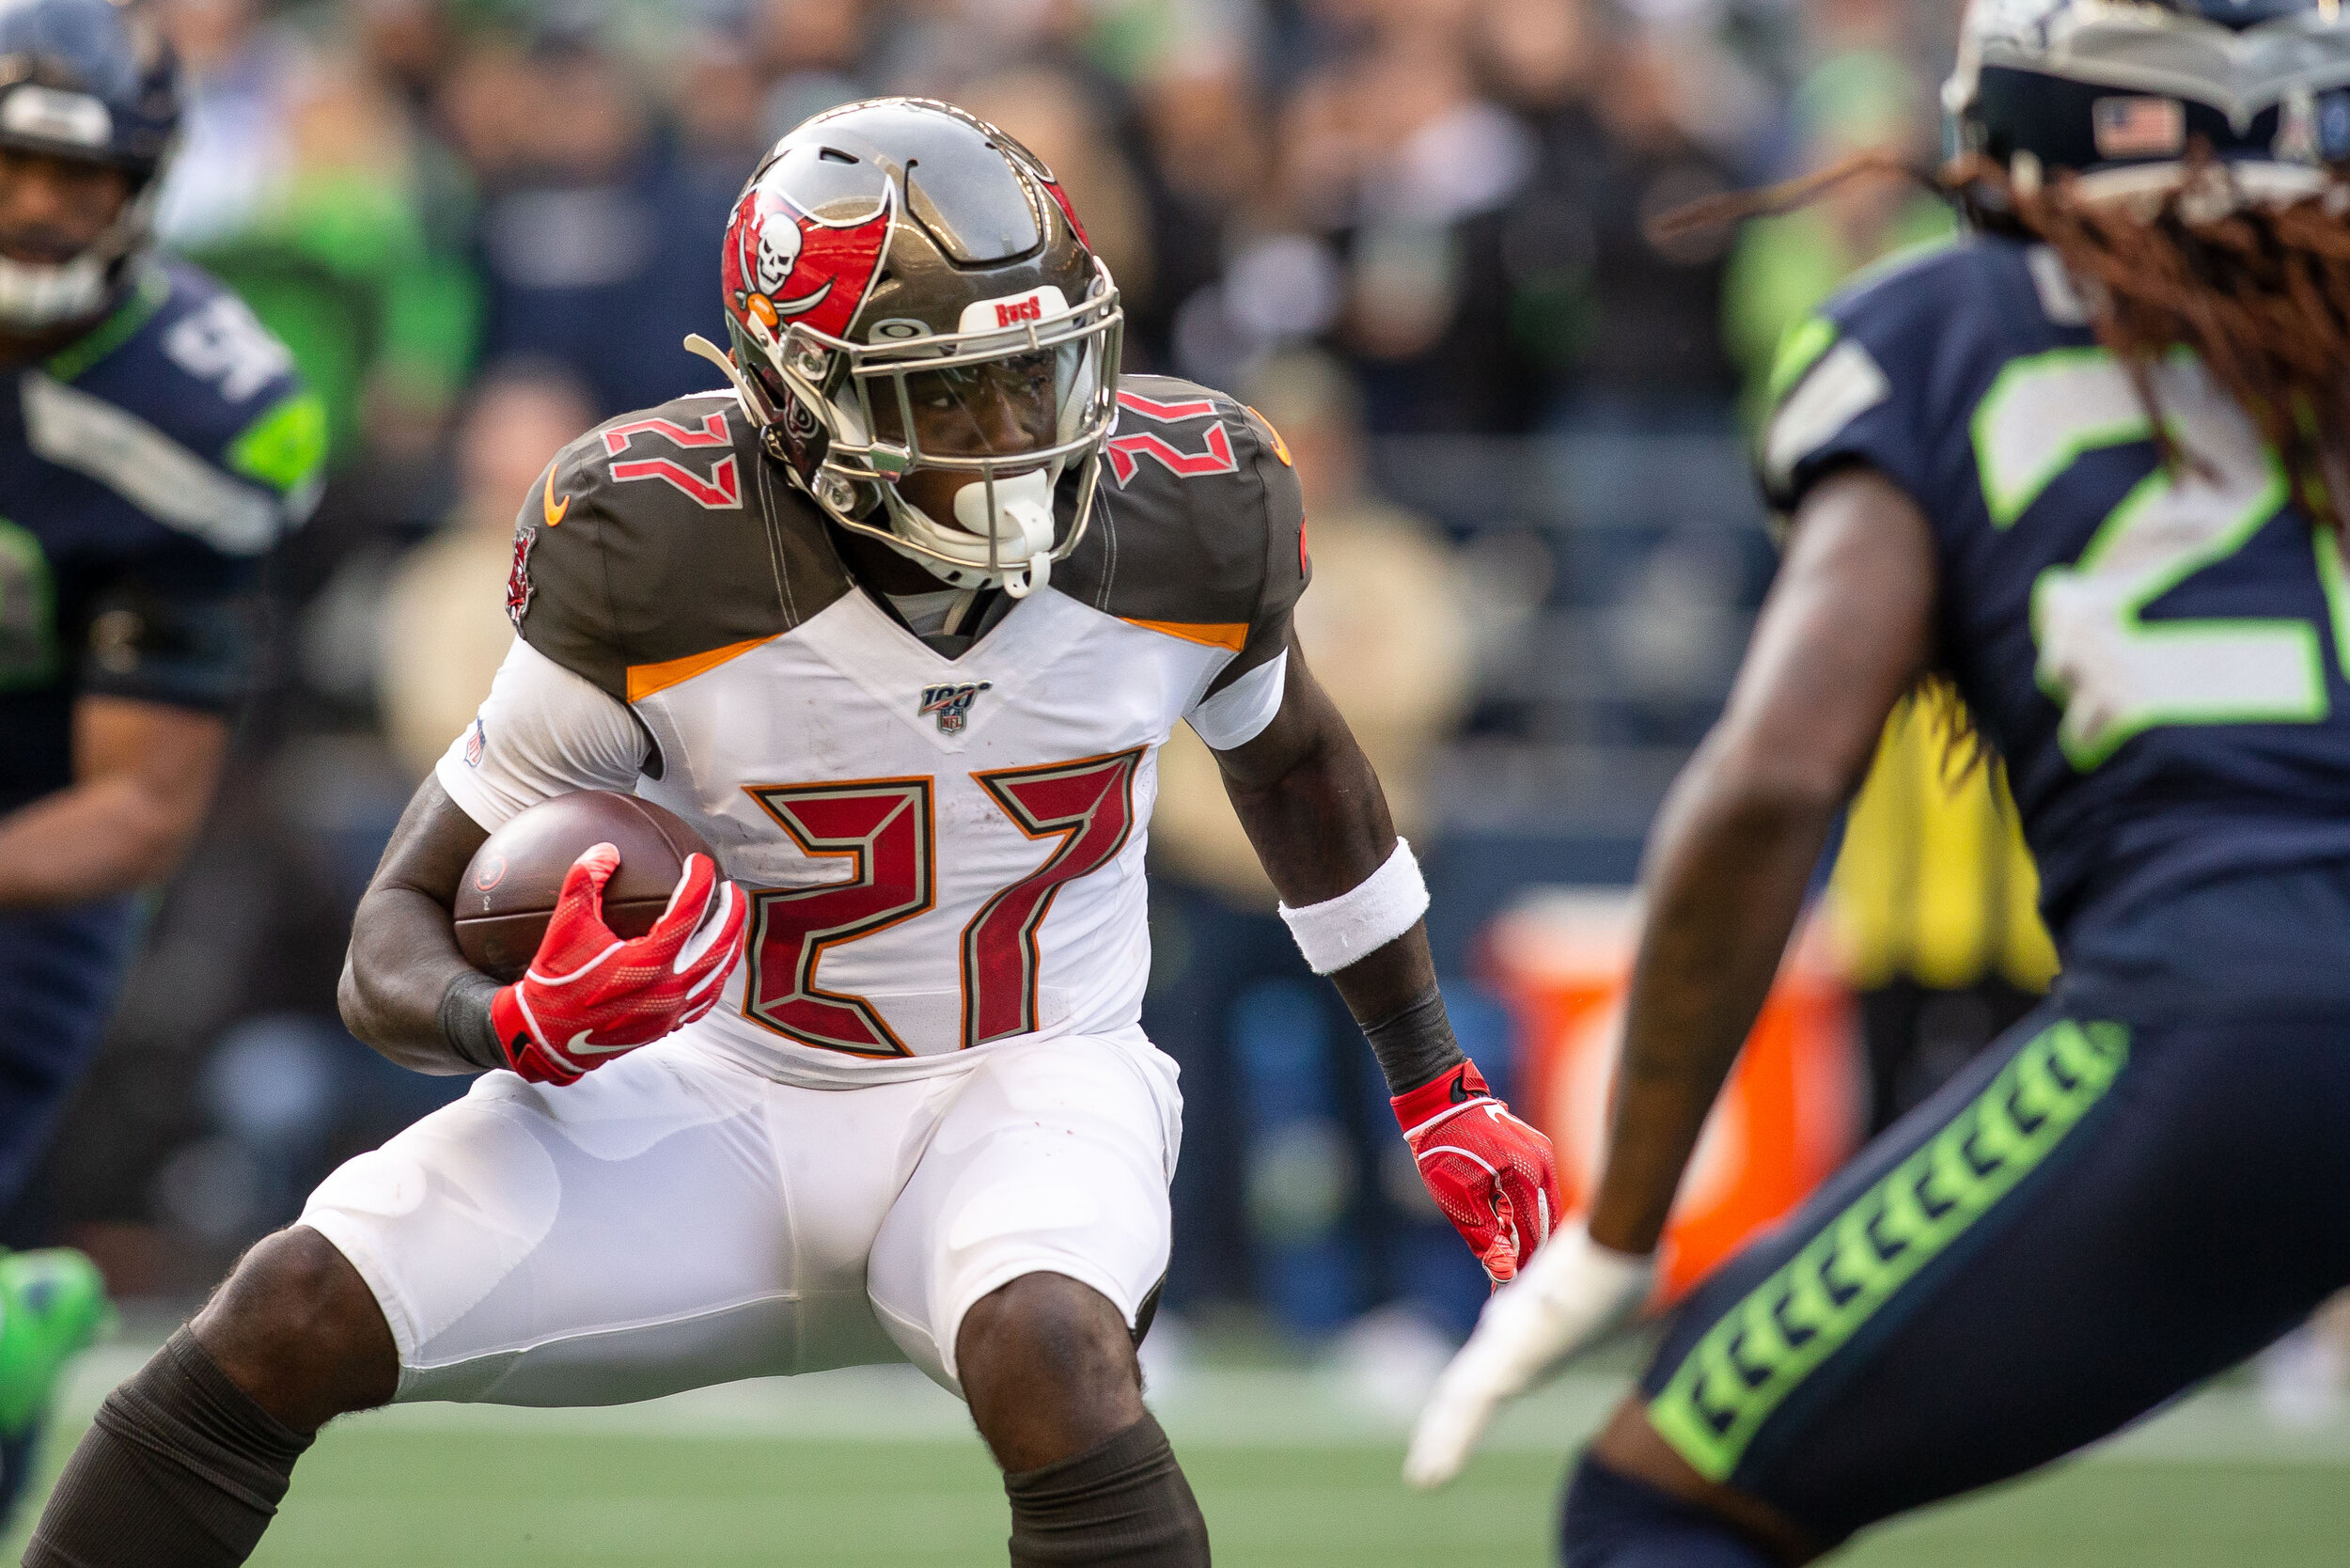  Tampa Bay Buccaneers running back Ronald Jones II (27) runs with the ball during the third quarter of an NFL football game against the Seattle Seahawks, Sunday, Nov. 3, 2019, in Seattle. Seattle defeated Tampa Bay 40-34 in overtime. (Matt Ferris/Ima